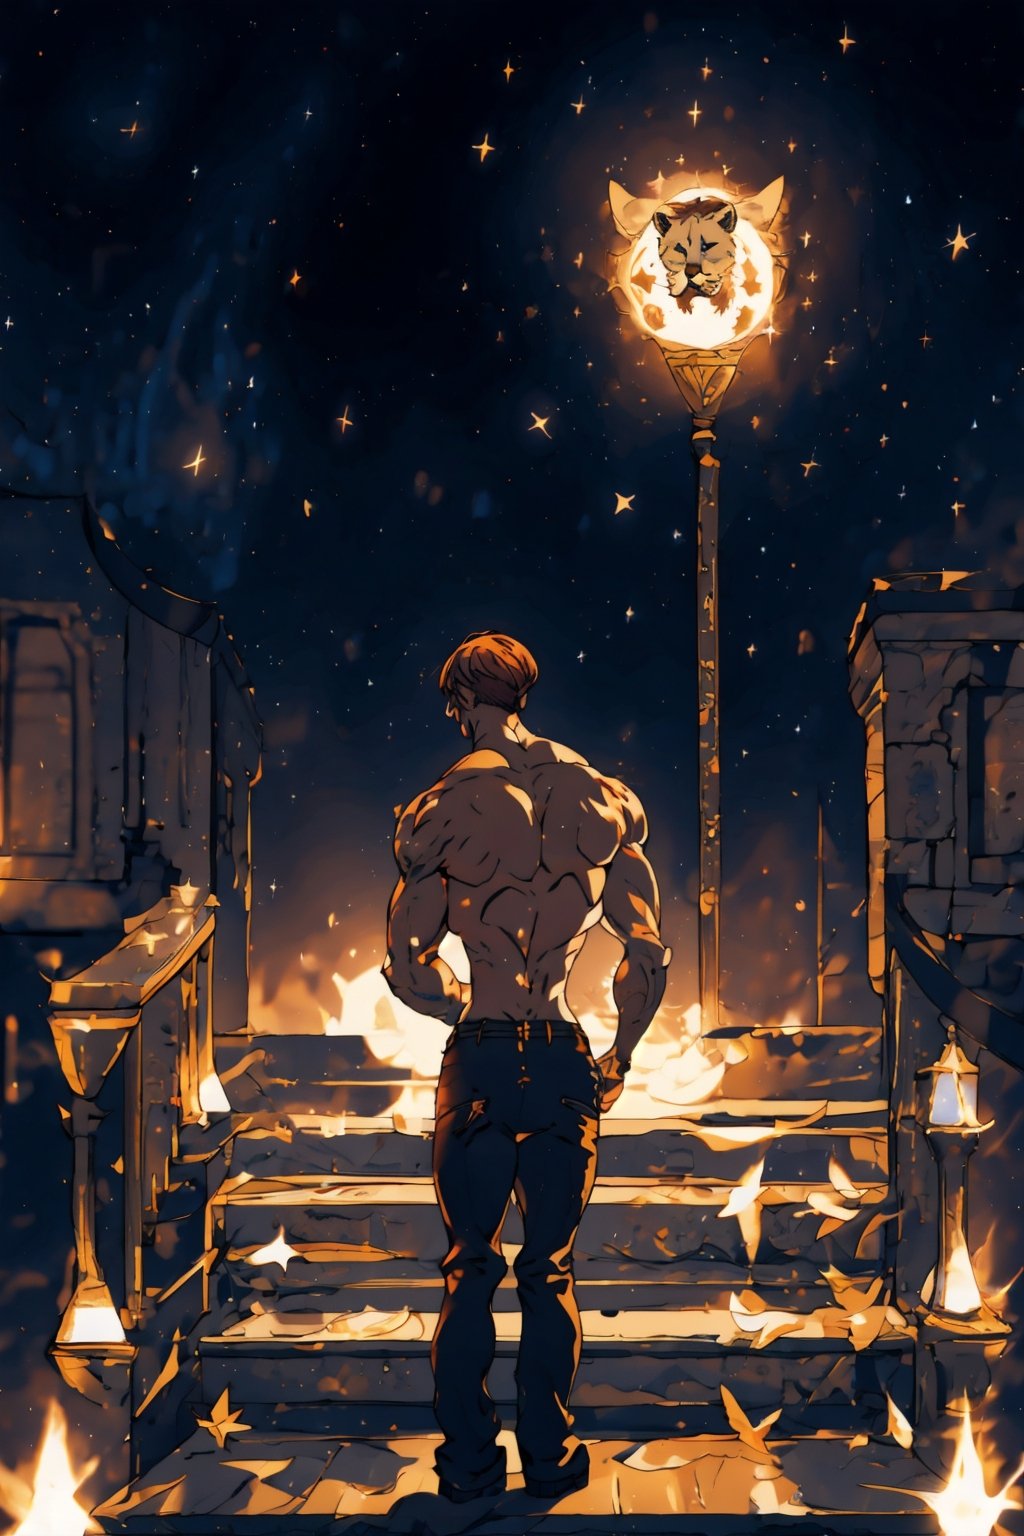 escanor-10:0.95, escanor, 1boy, topless, tattoo, lion head on back, ghostdom_20230621222536-000016:0.7 ,ghostdom, night, backlight, flowers:0.5, stairs, from behind, look at viewer, stary night,  stary night, (stars), (milky way), (dark environment:-0.6), (leo zodiac sign)
,1 girl